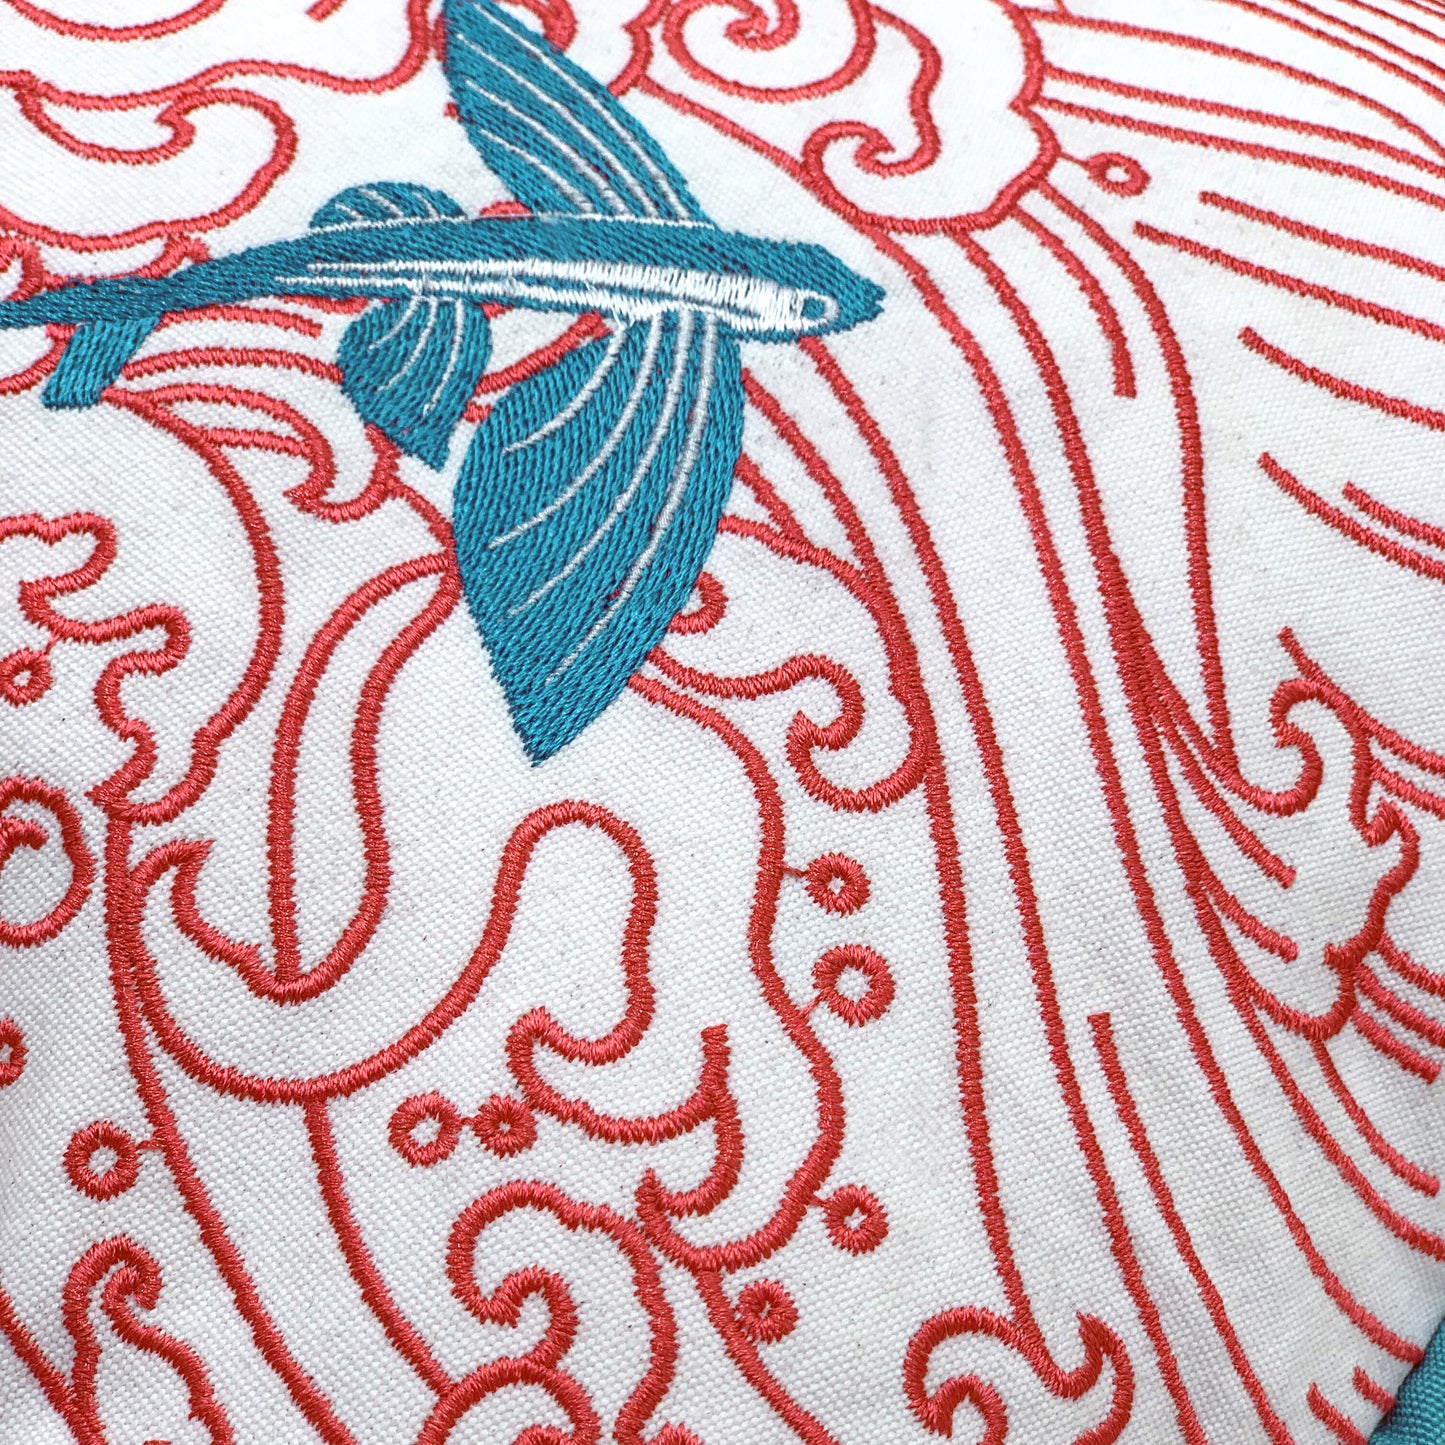 Detail shot of the Coral Waves and Fish pillow embroidery.